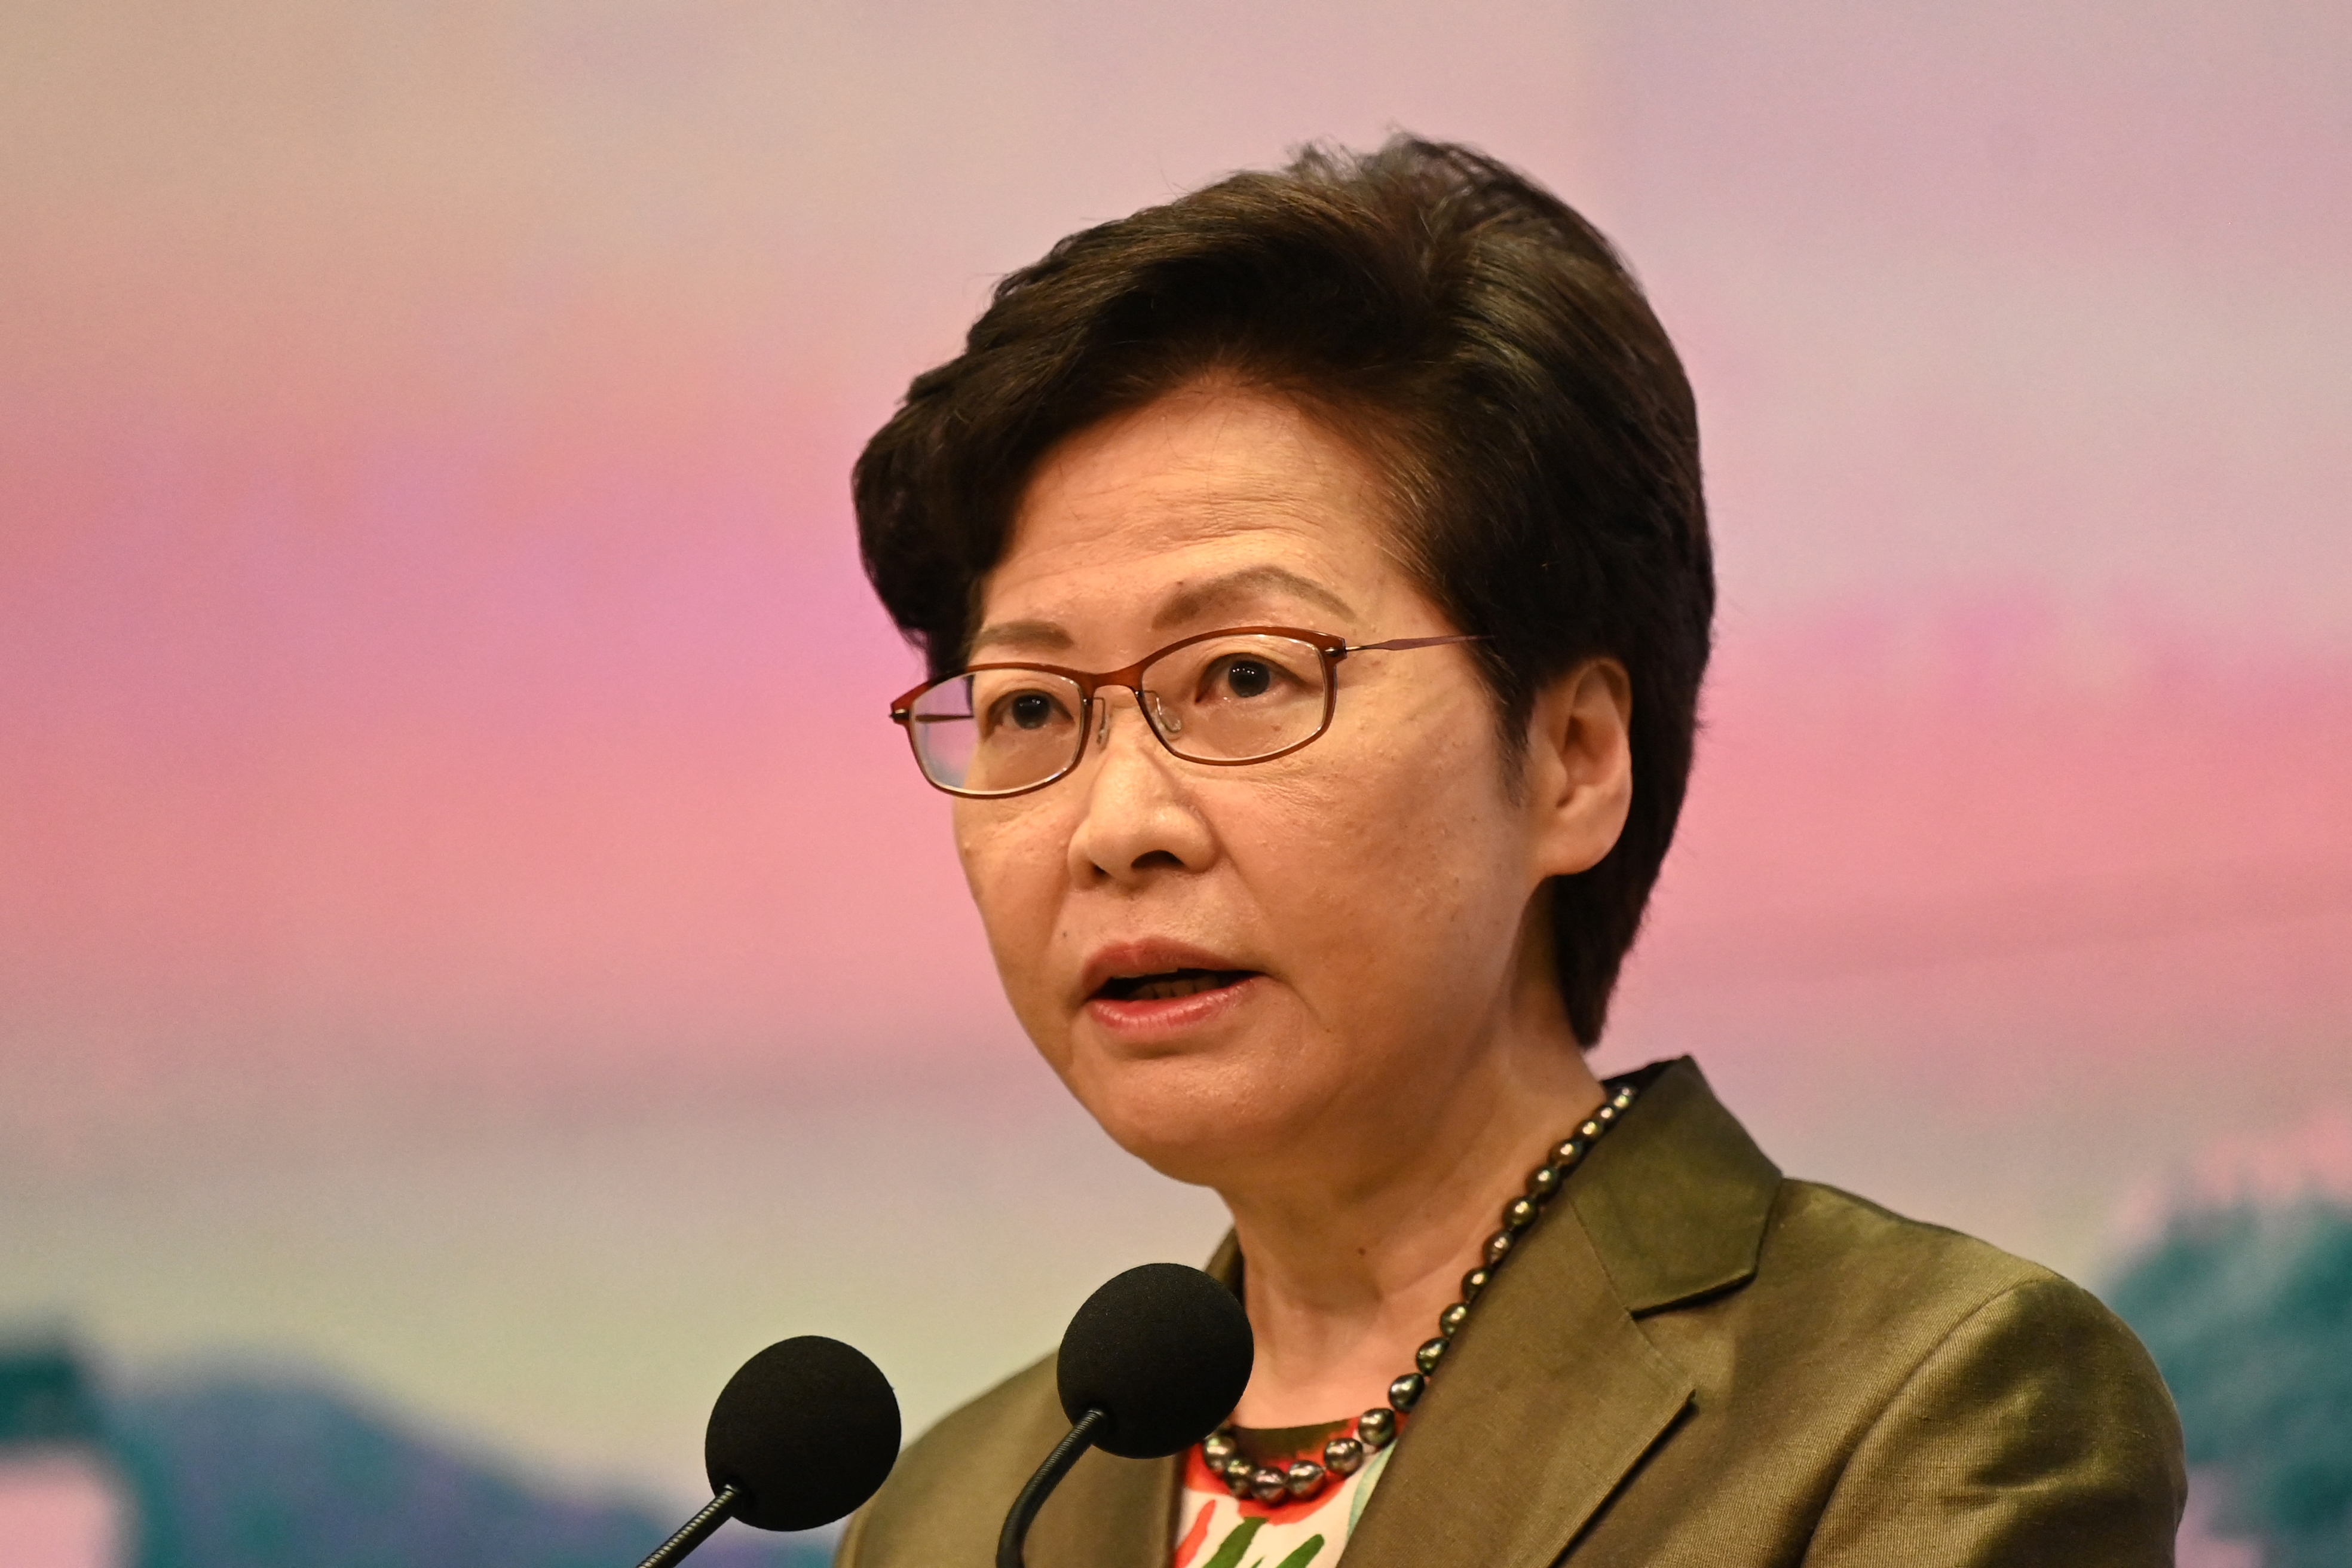 Hong Kong’s Carrie Lam Added to List of World Leaders Restricting Press Freedom